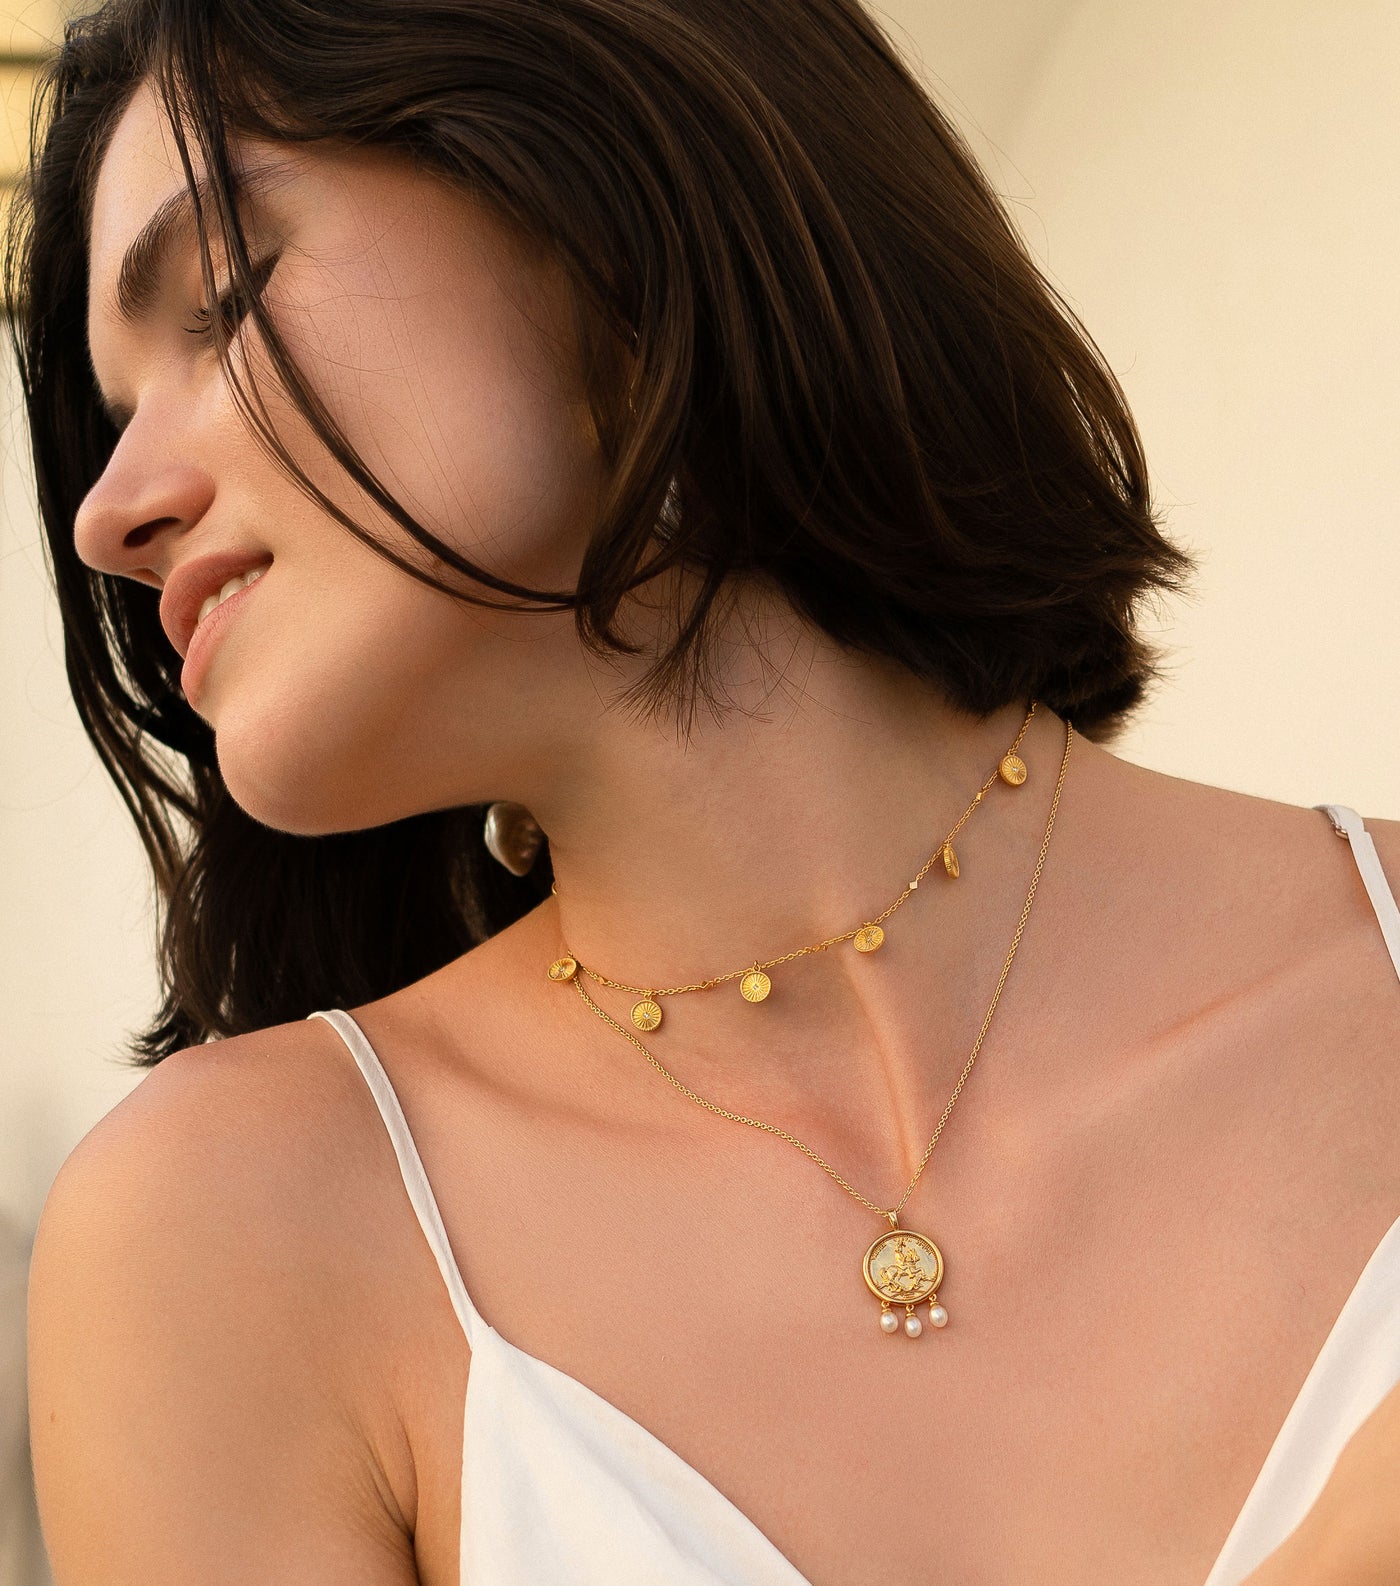 Model wearing gold engraved horse coin pendant necklace with hanging freshwater pearls and coin choker with CZ crystals